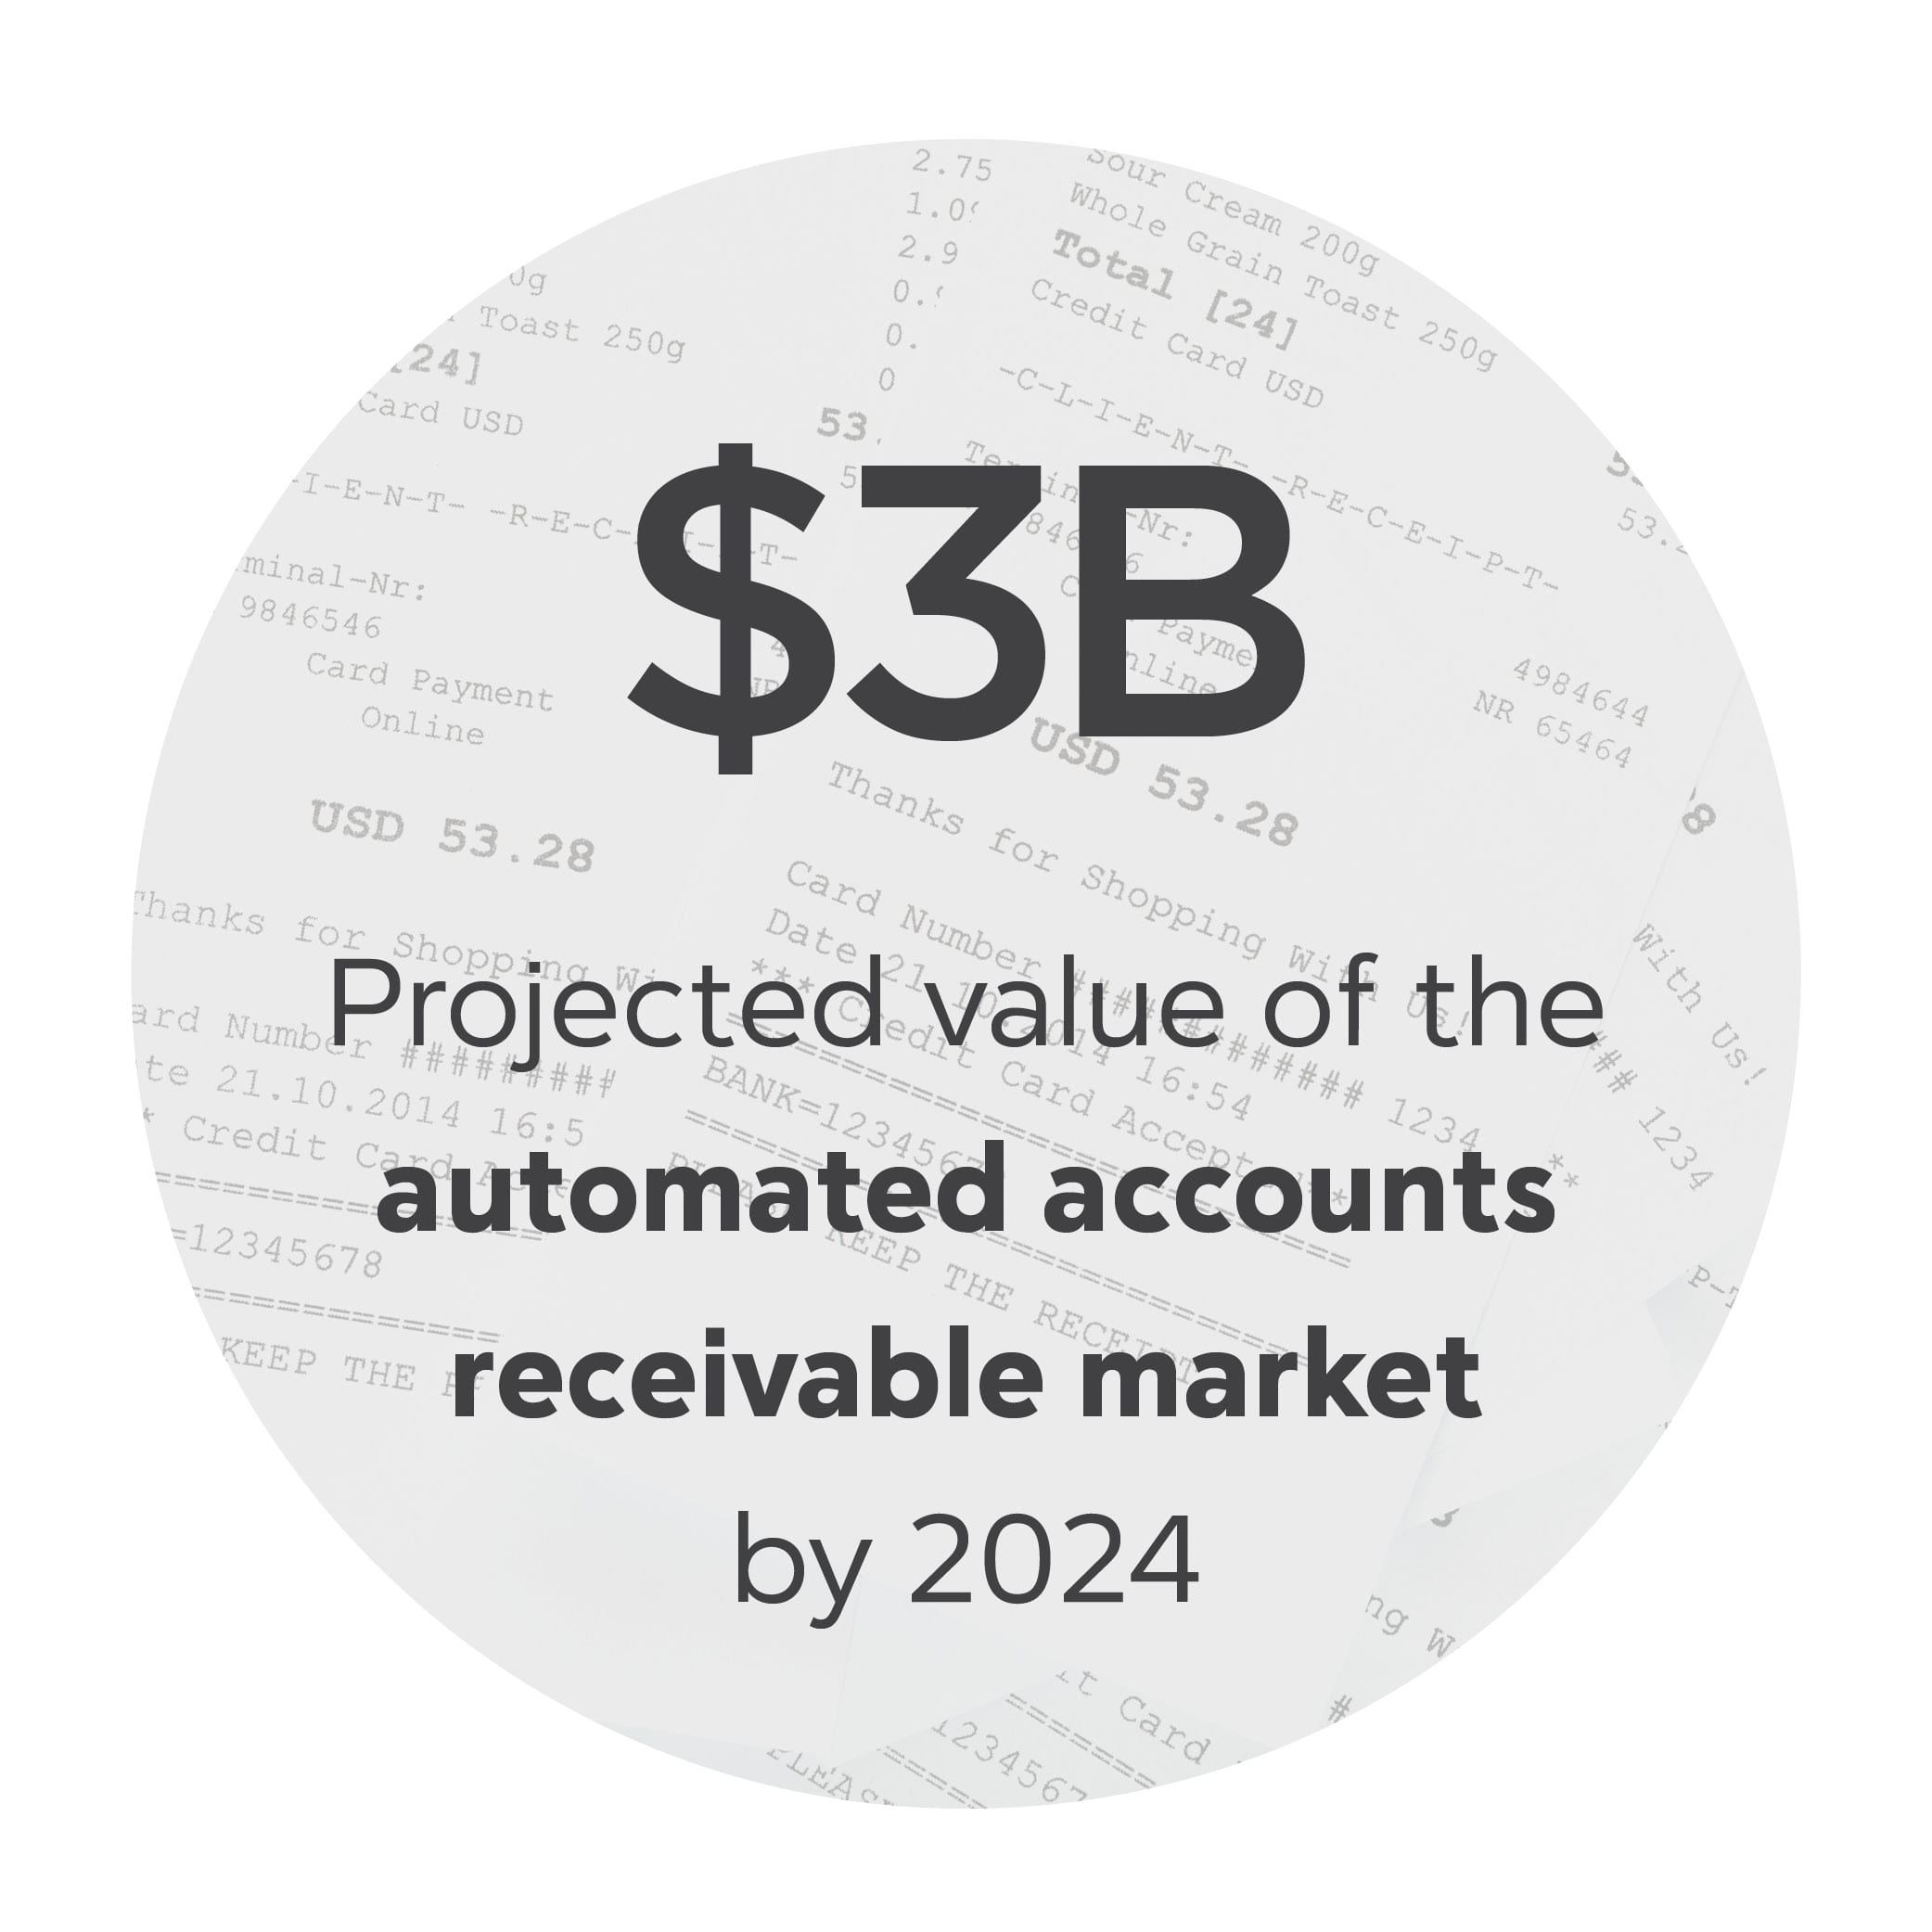 $3B: Projected value of the automated accounts receivable market by 2024